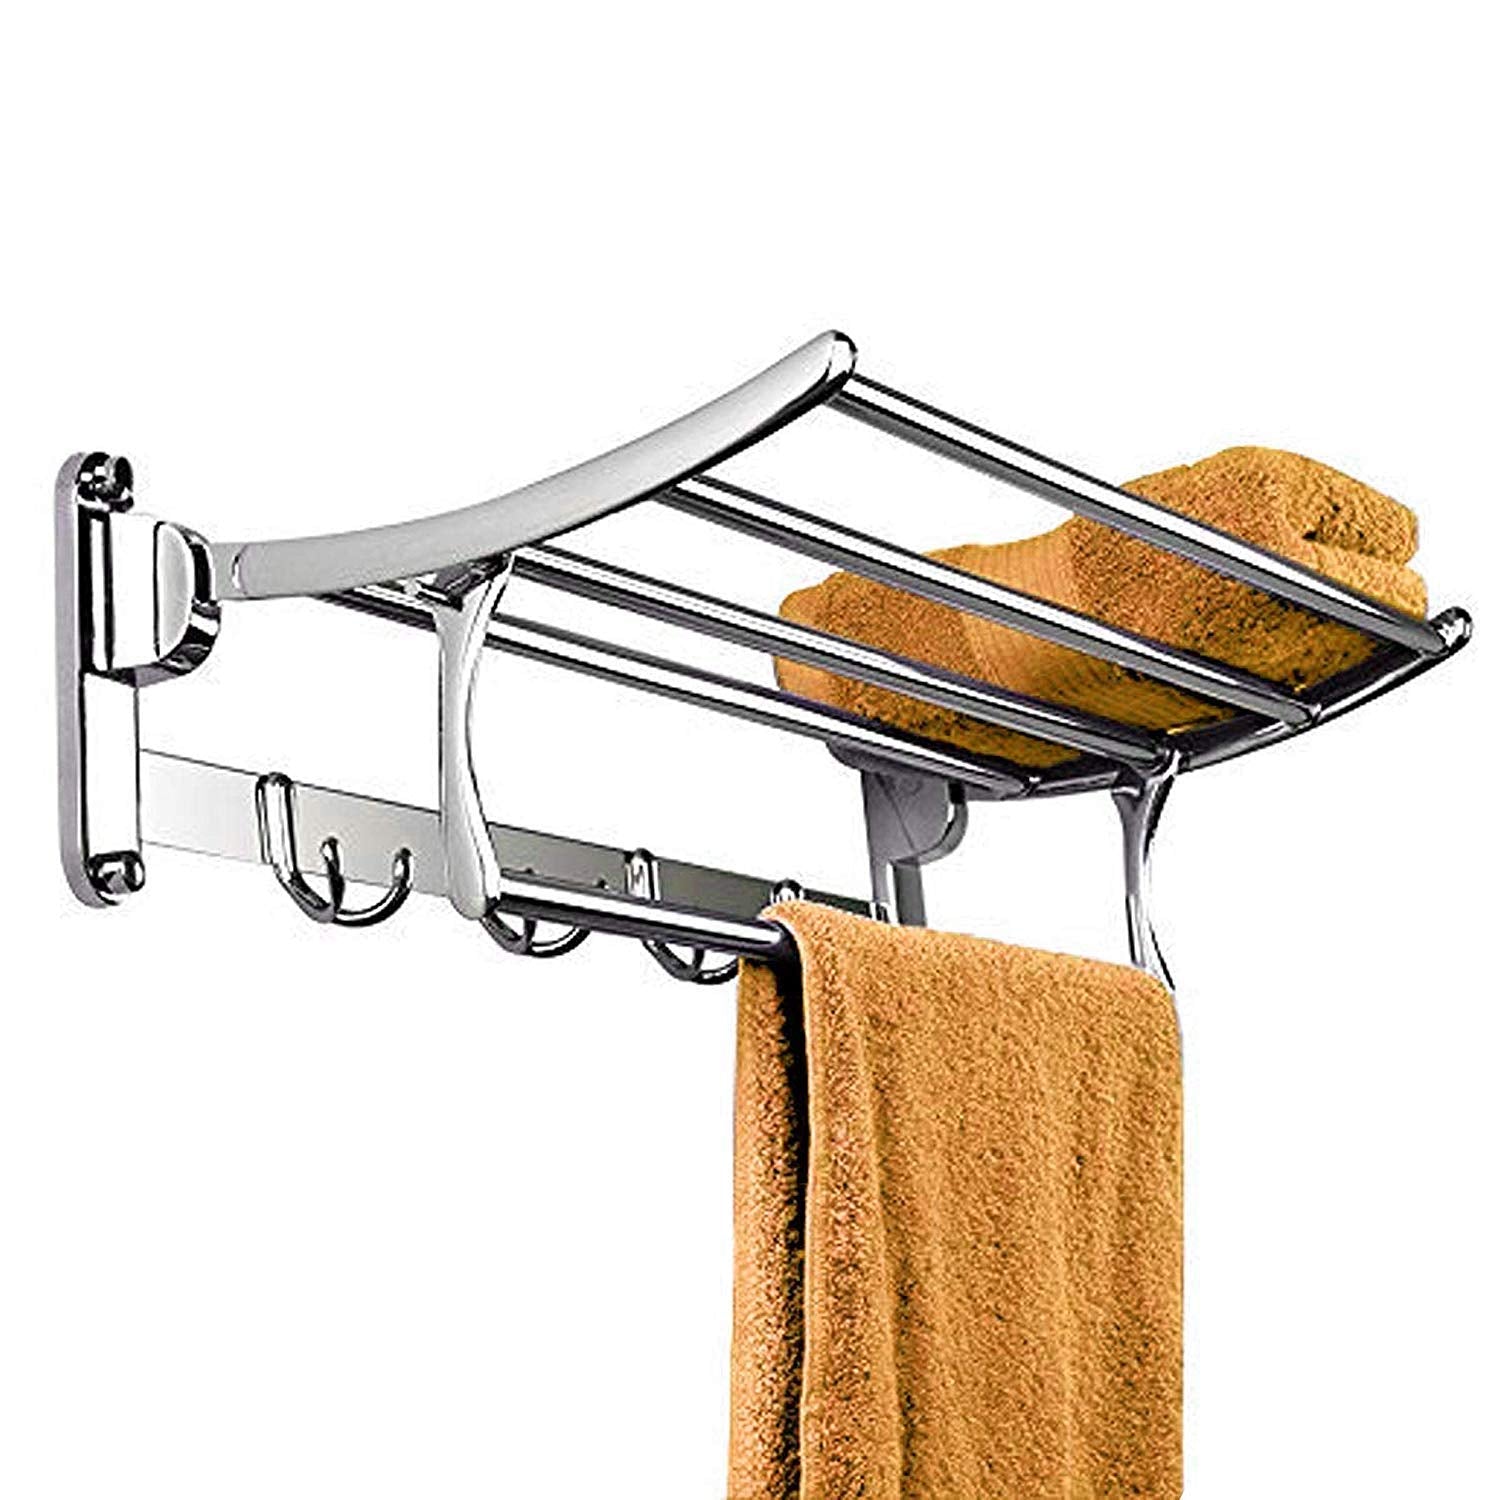 Plantex Stainless Steel Folding Towel Rack with Stainless Steel 304 Grade Cubic Bathroom Accessories Set 5pcs (Towel Rod/Napkin Ring/Tumbler Holder/Soap Dish/Robe Hook)